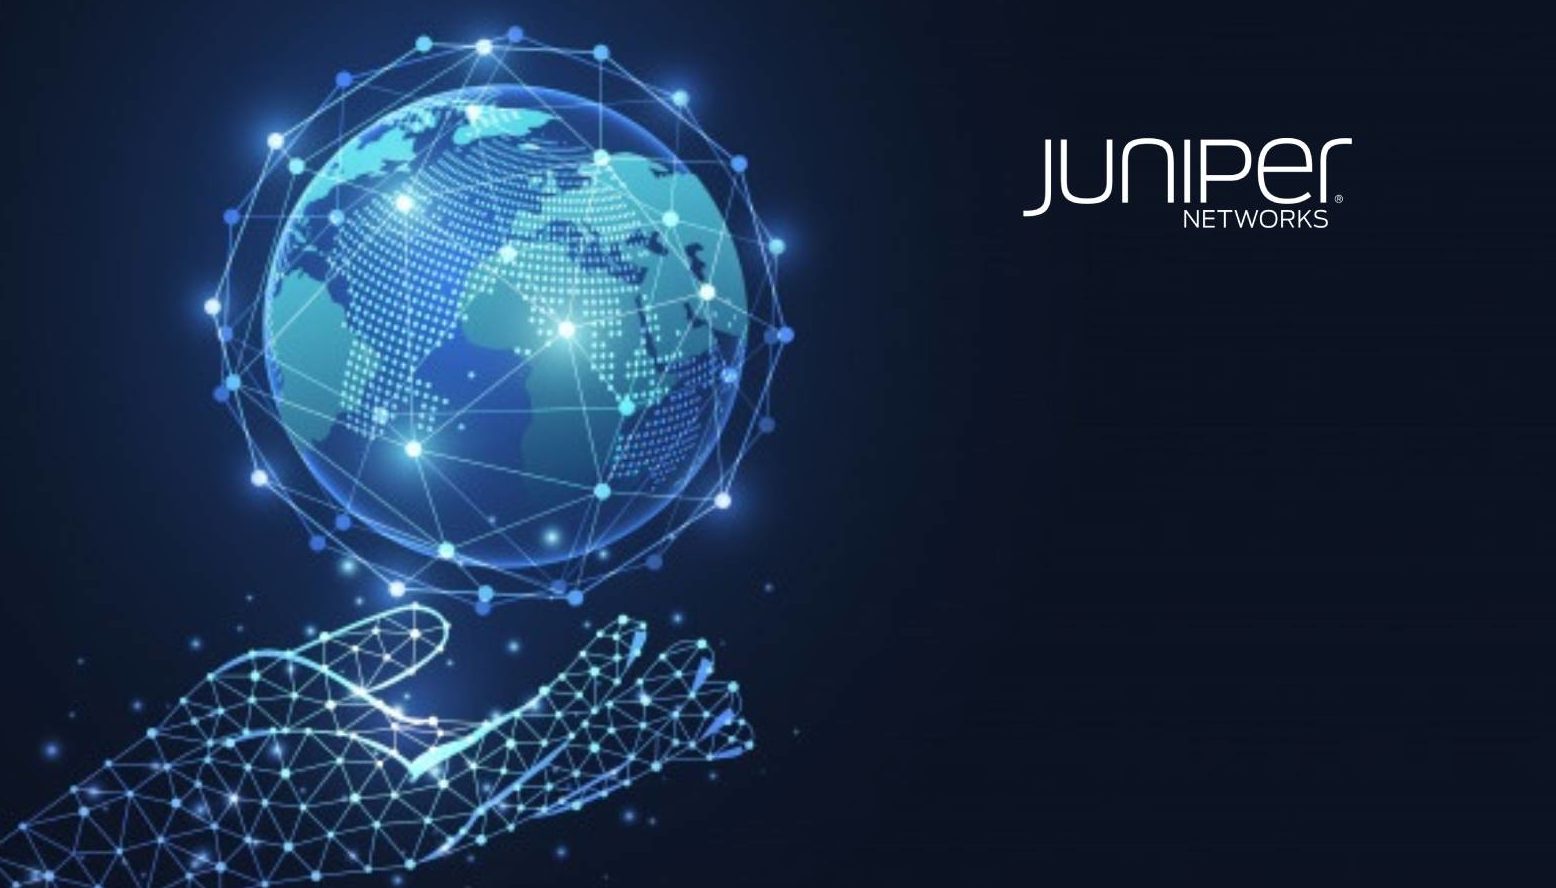 MDSi Partners with Juniper Networks To Deliver New Diversity Partner  Program Juniper Diversity+ - MDSi